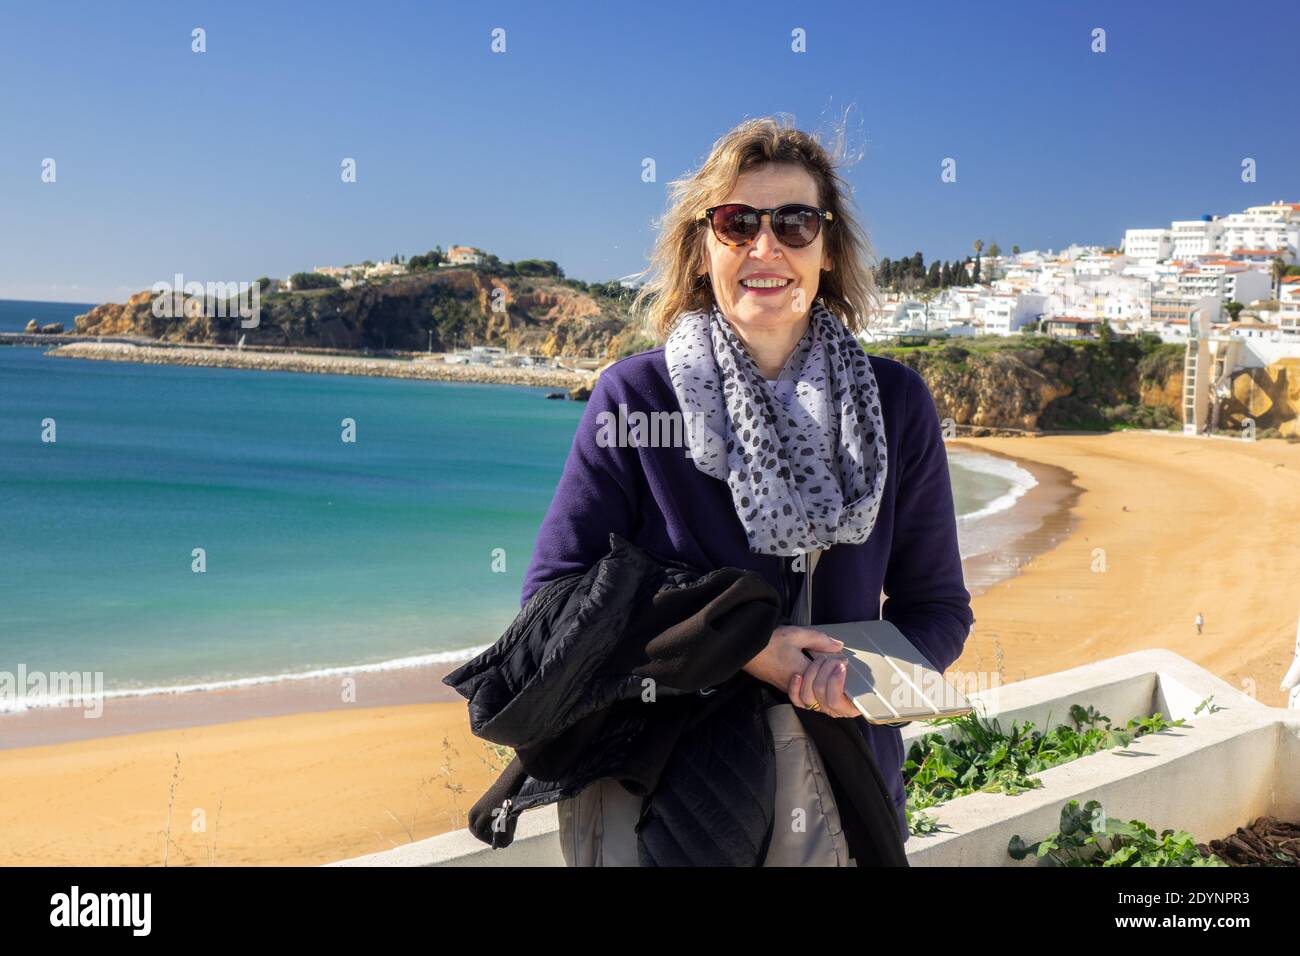 Middle Aged Caucasian Woman Poses For Photo At Albufeira Old Town Fishermans Beach In Albufiera The Algarve Portugal Winter Travel. Model Released Stock Photo